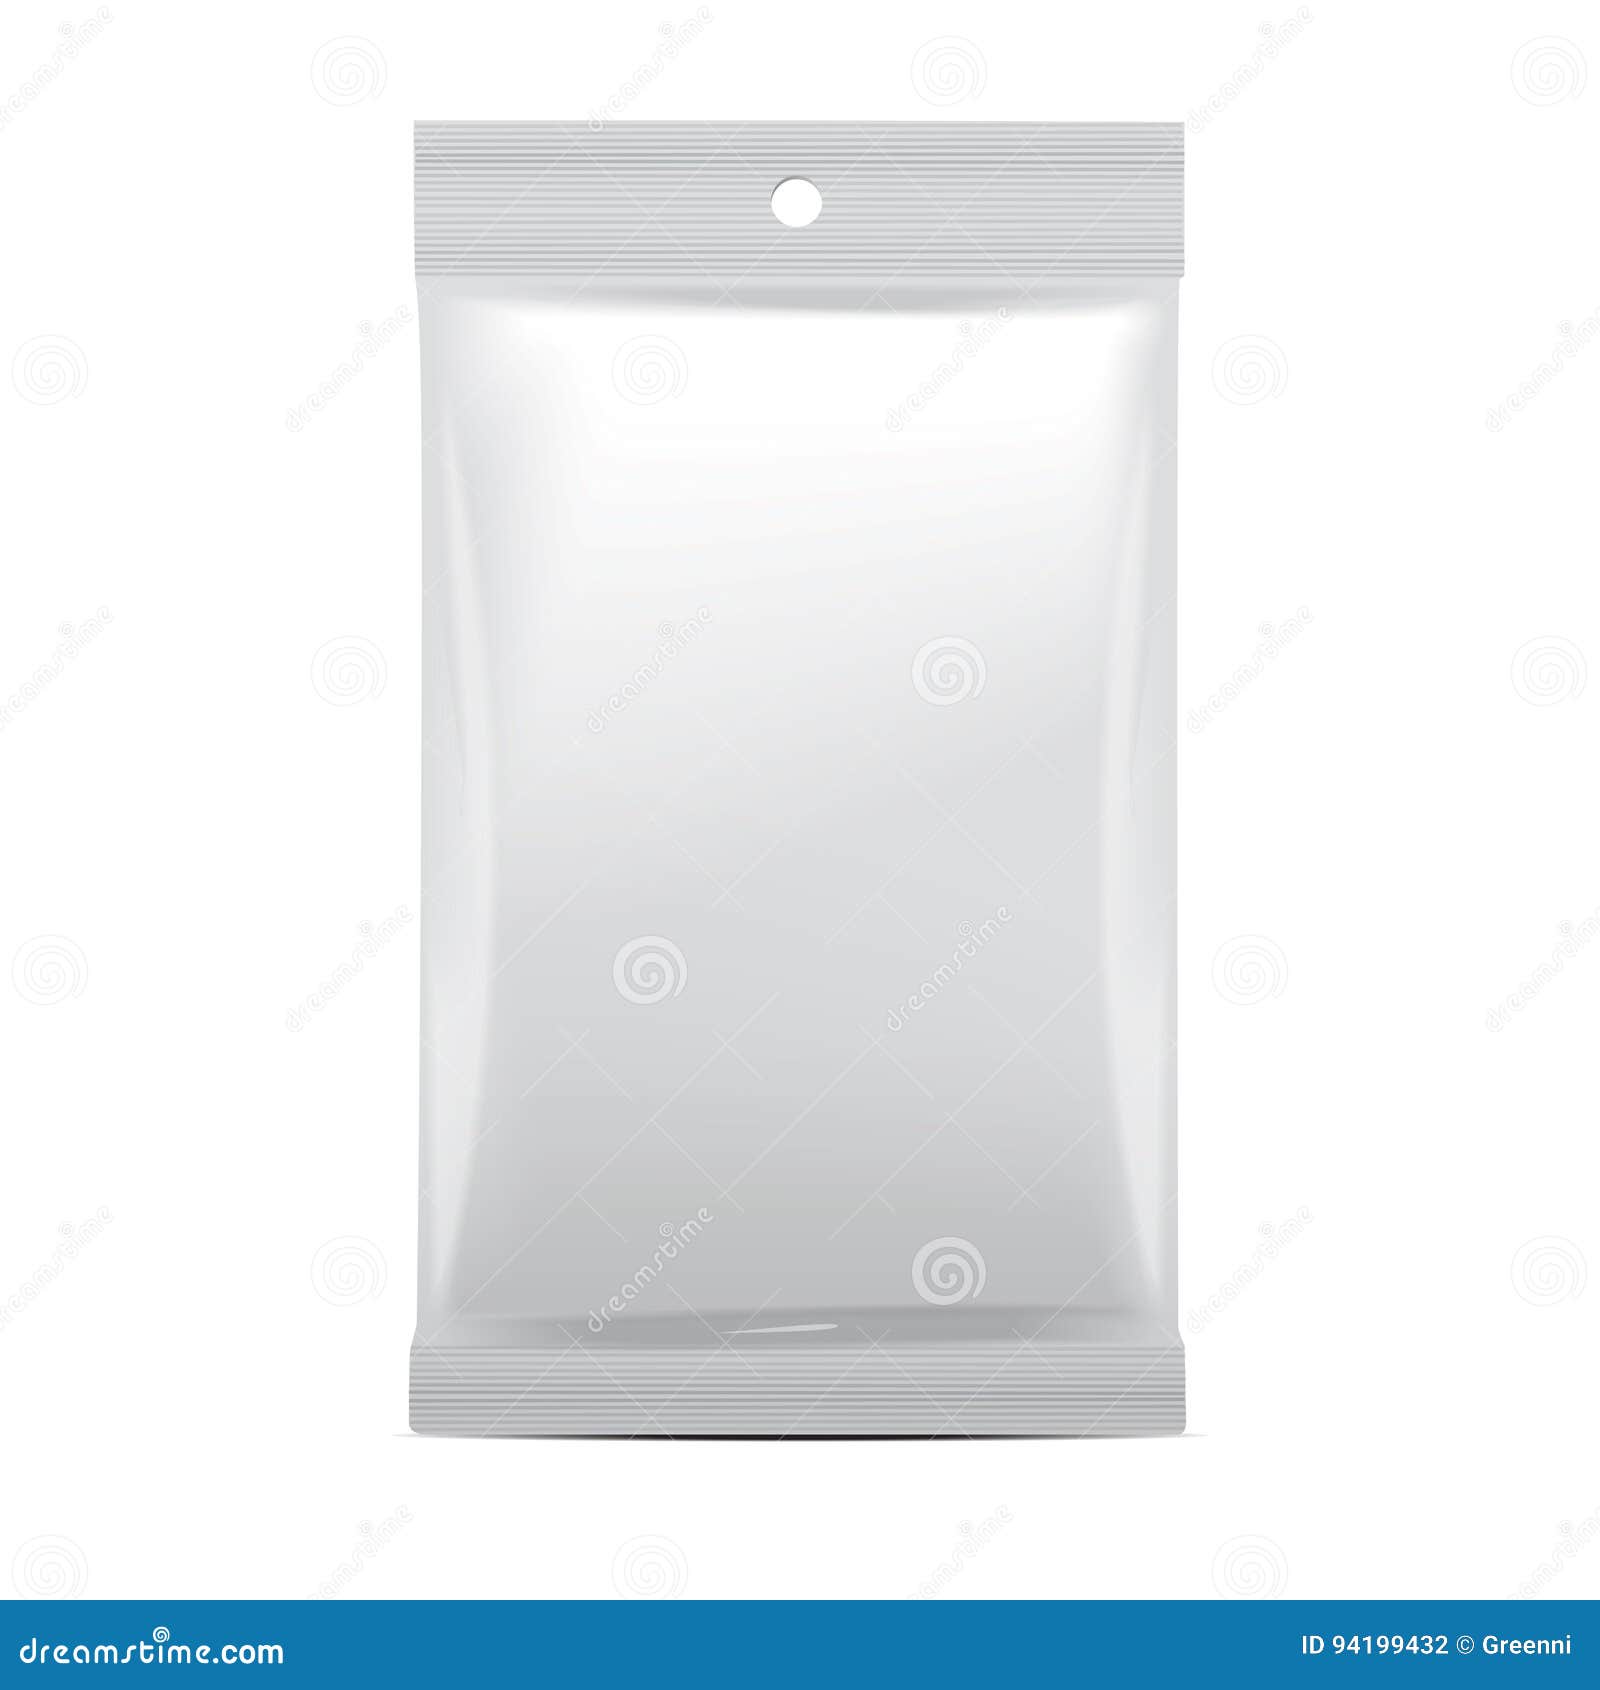 White clear plastic bag packaging for snack Vector Image